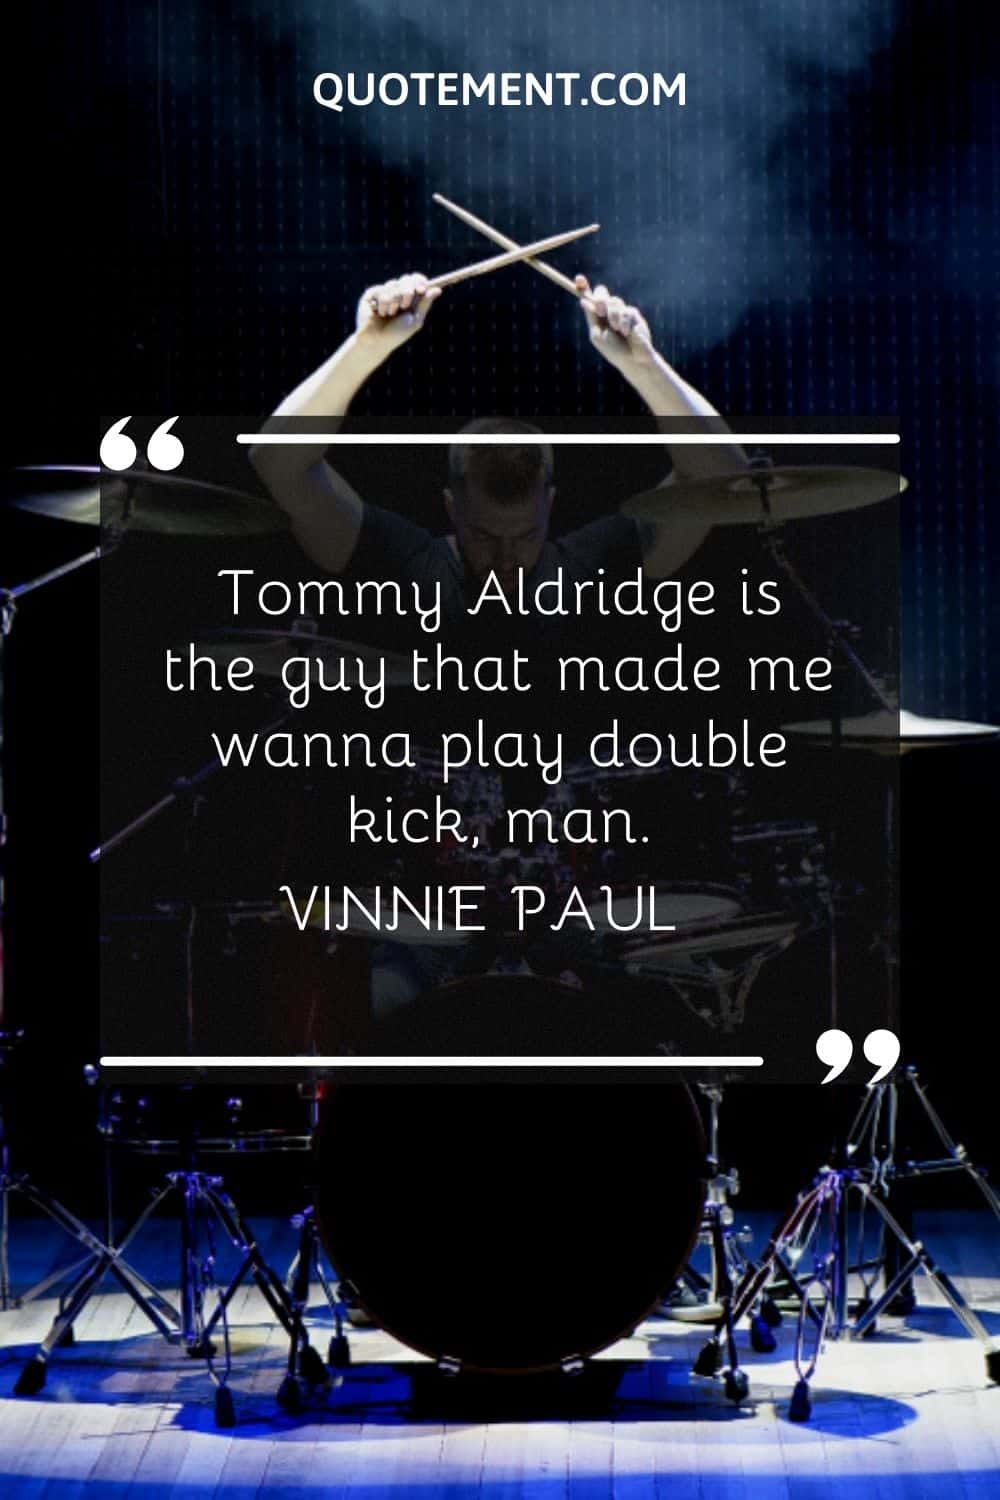 Tommy Aldridge is the guy that made me wanna play double kick, man